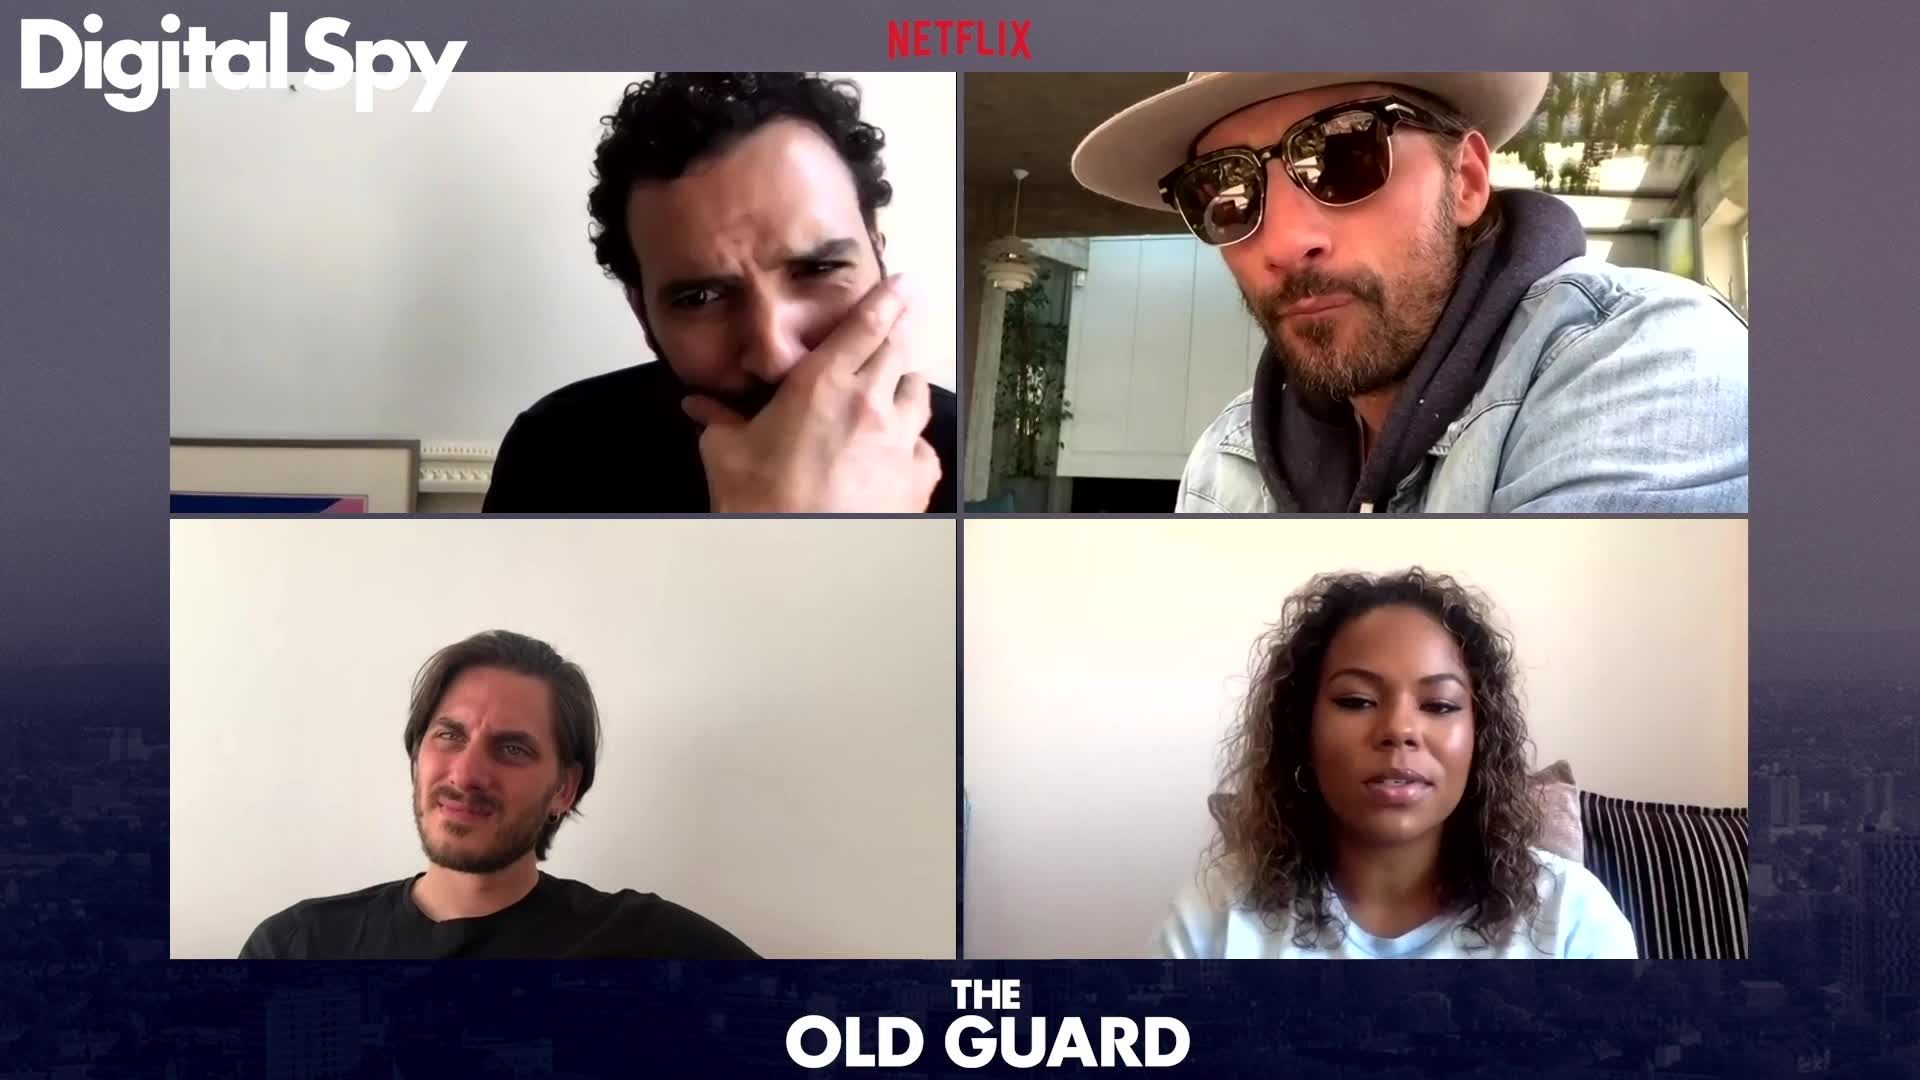 The Old Guard 2 - Release Date, Cast, Plot (The Cine Wizard) 